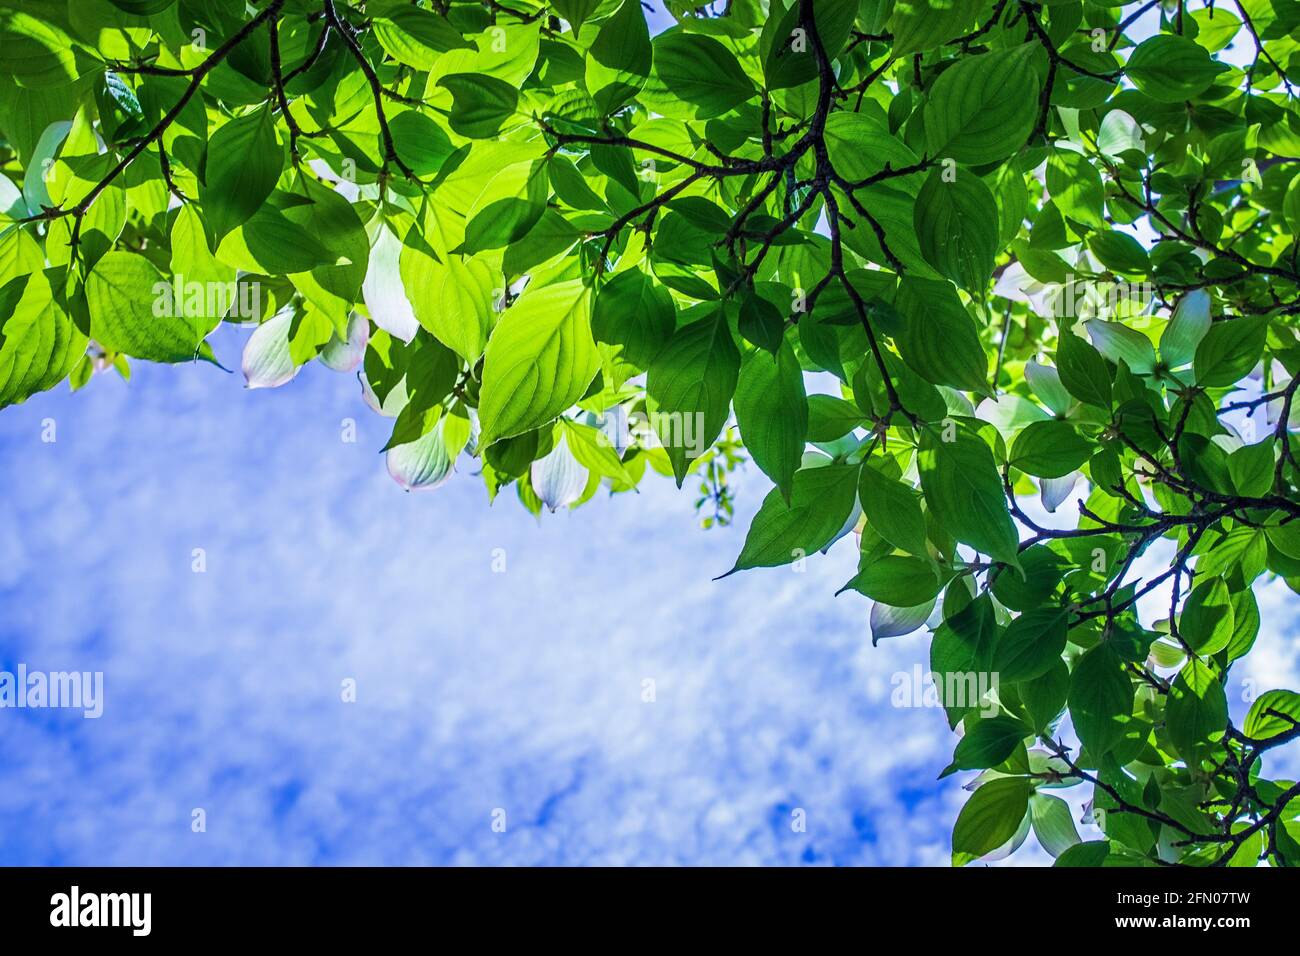 Looking up through the green leaves of a dogwood tree to the blue cloudy sky Stock Photo